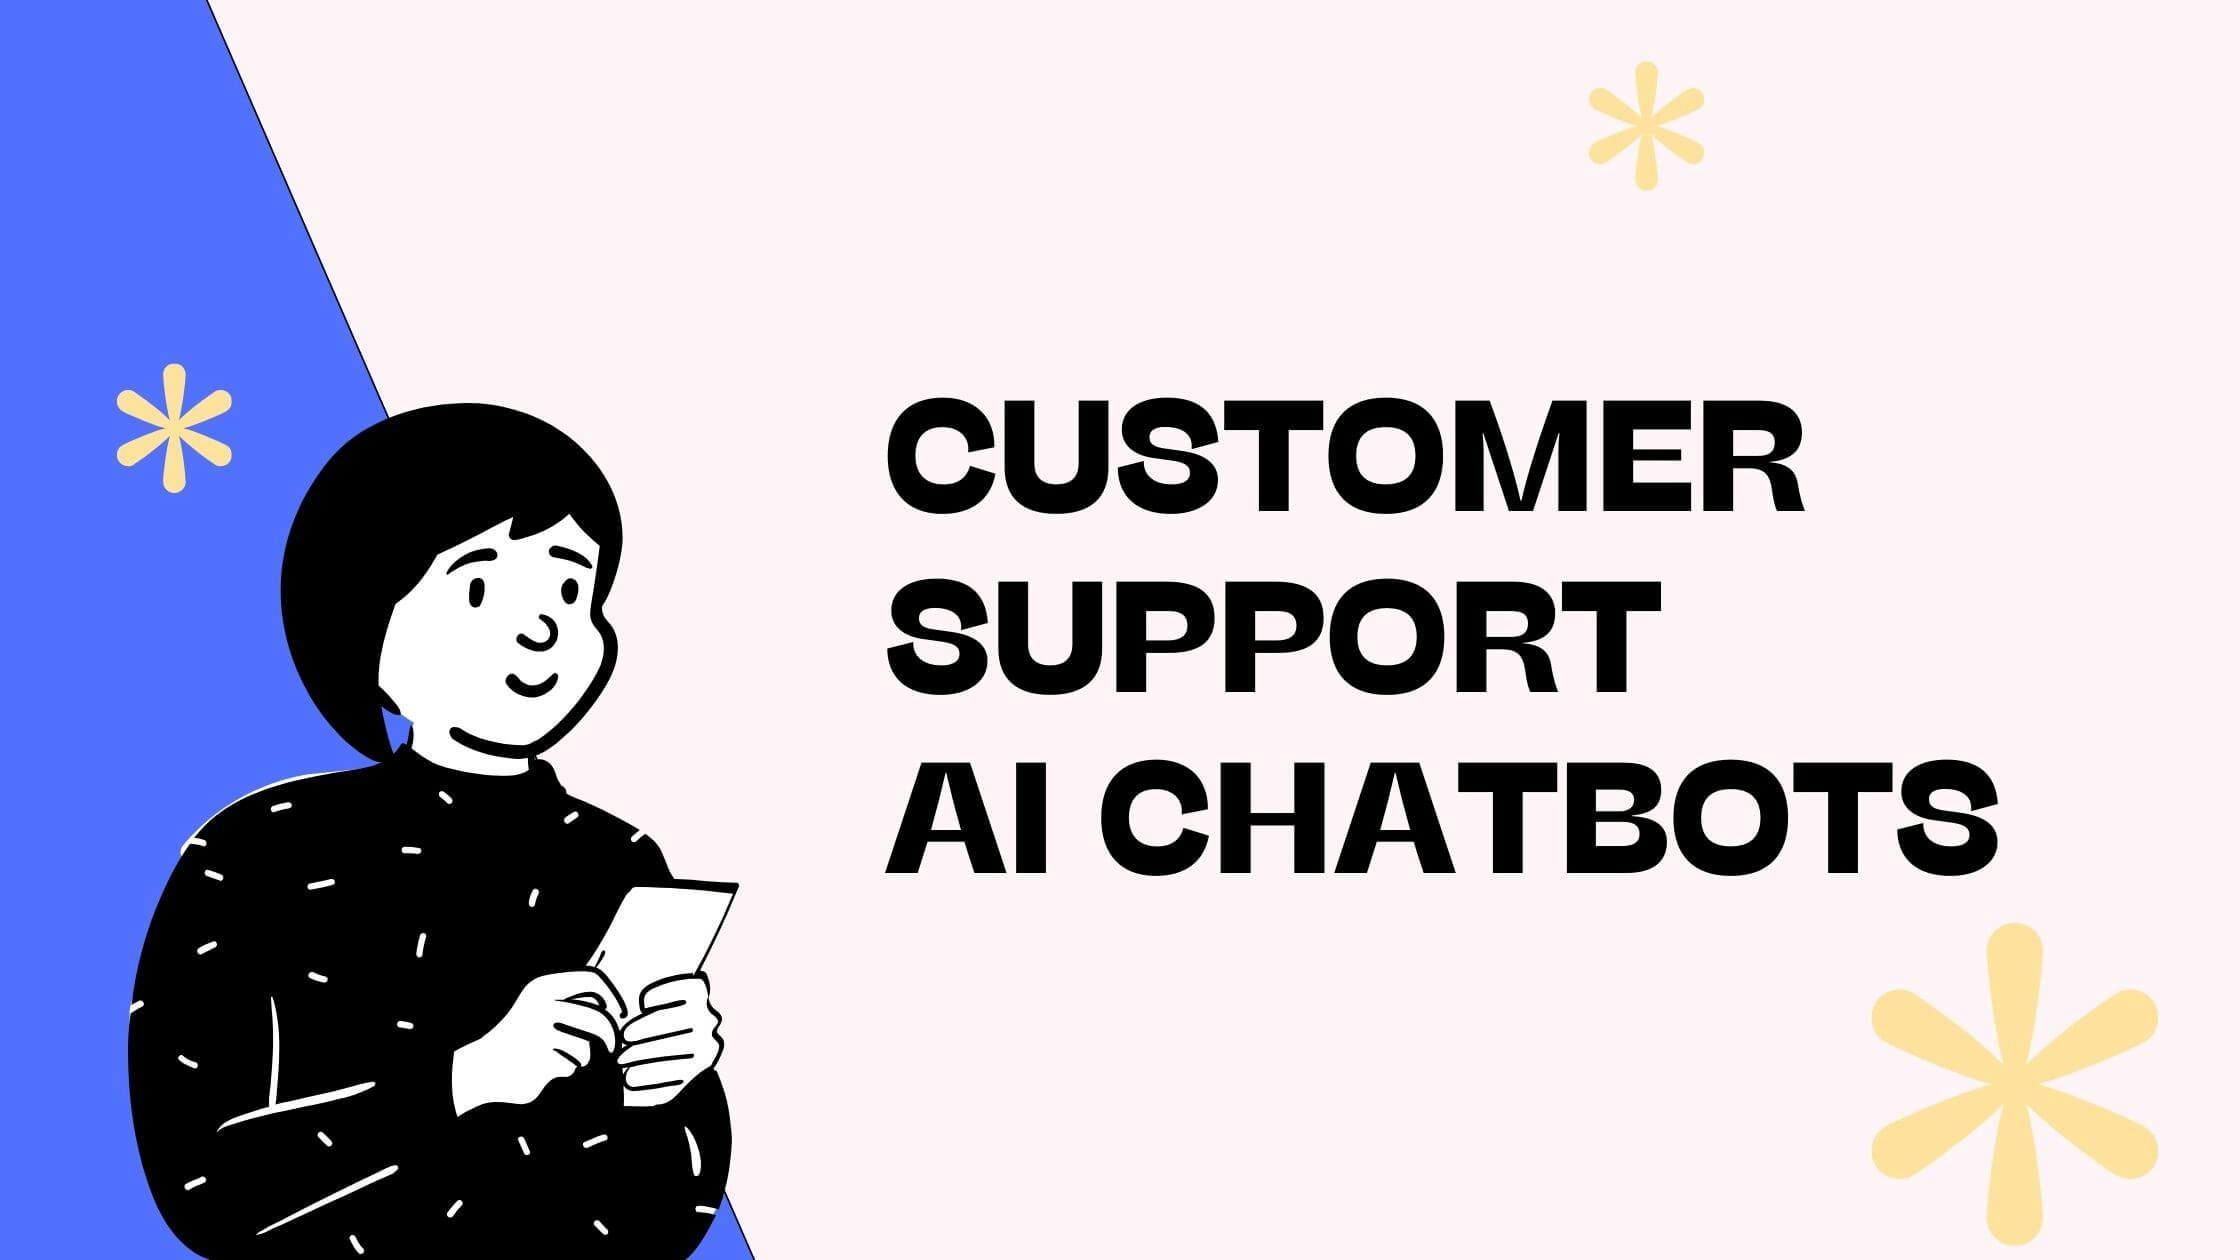 We Tried the Top 5 AI Chatbots for Customer Service